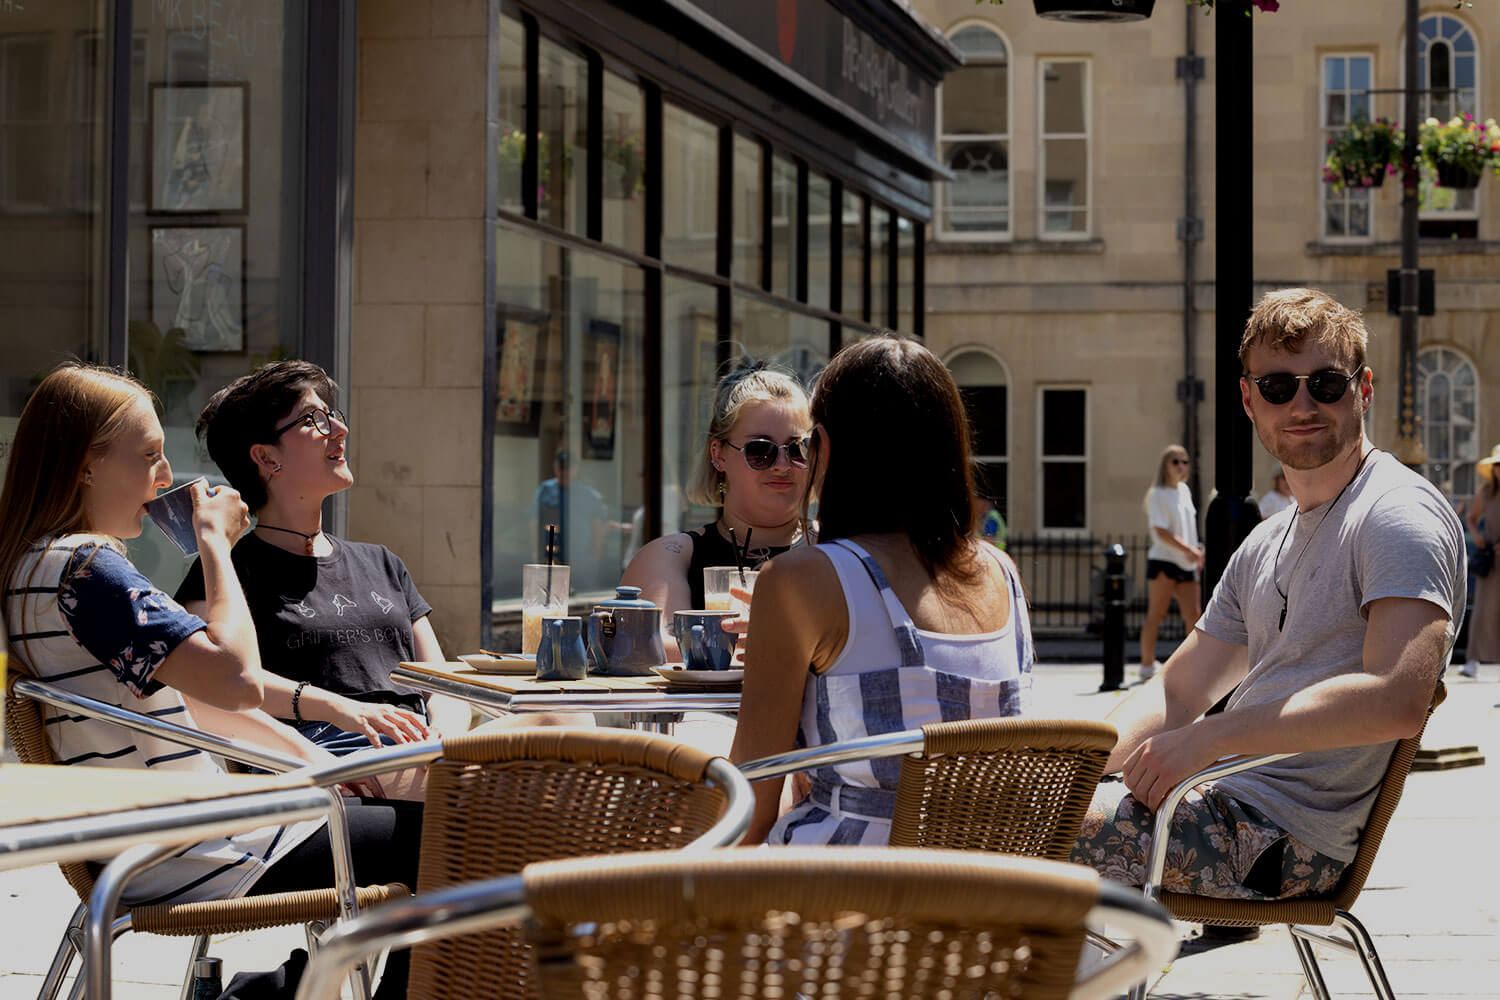 A group of students sitting outdoors at a coffee shop, with Bath's classical architecture in the background